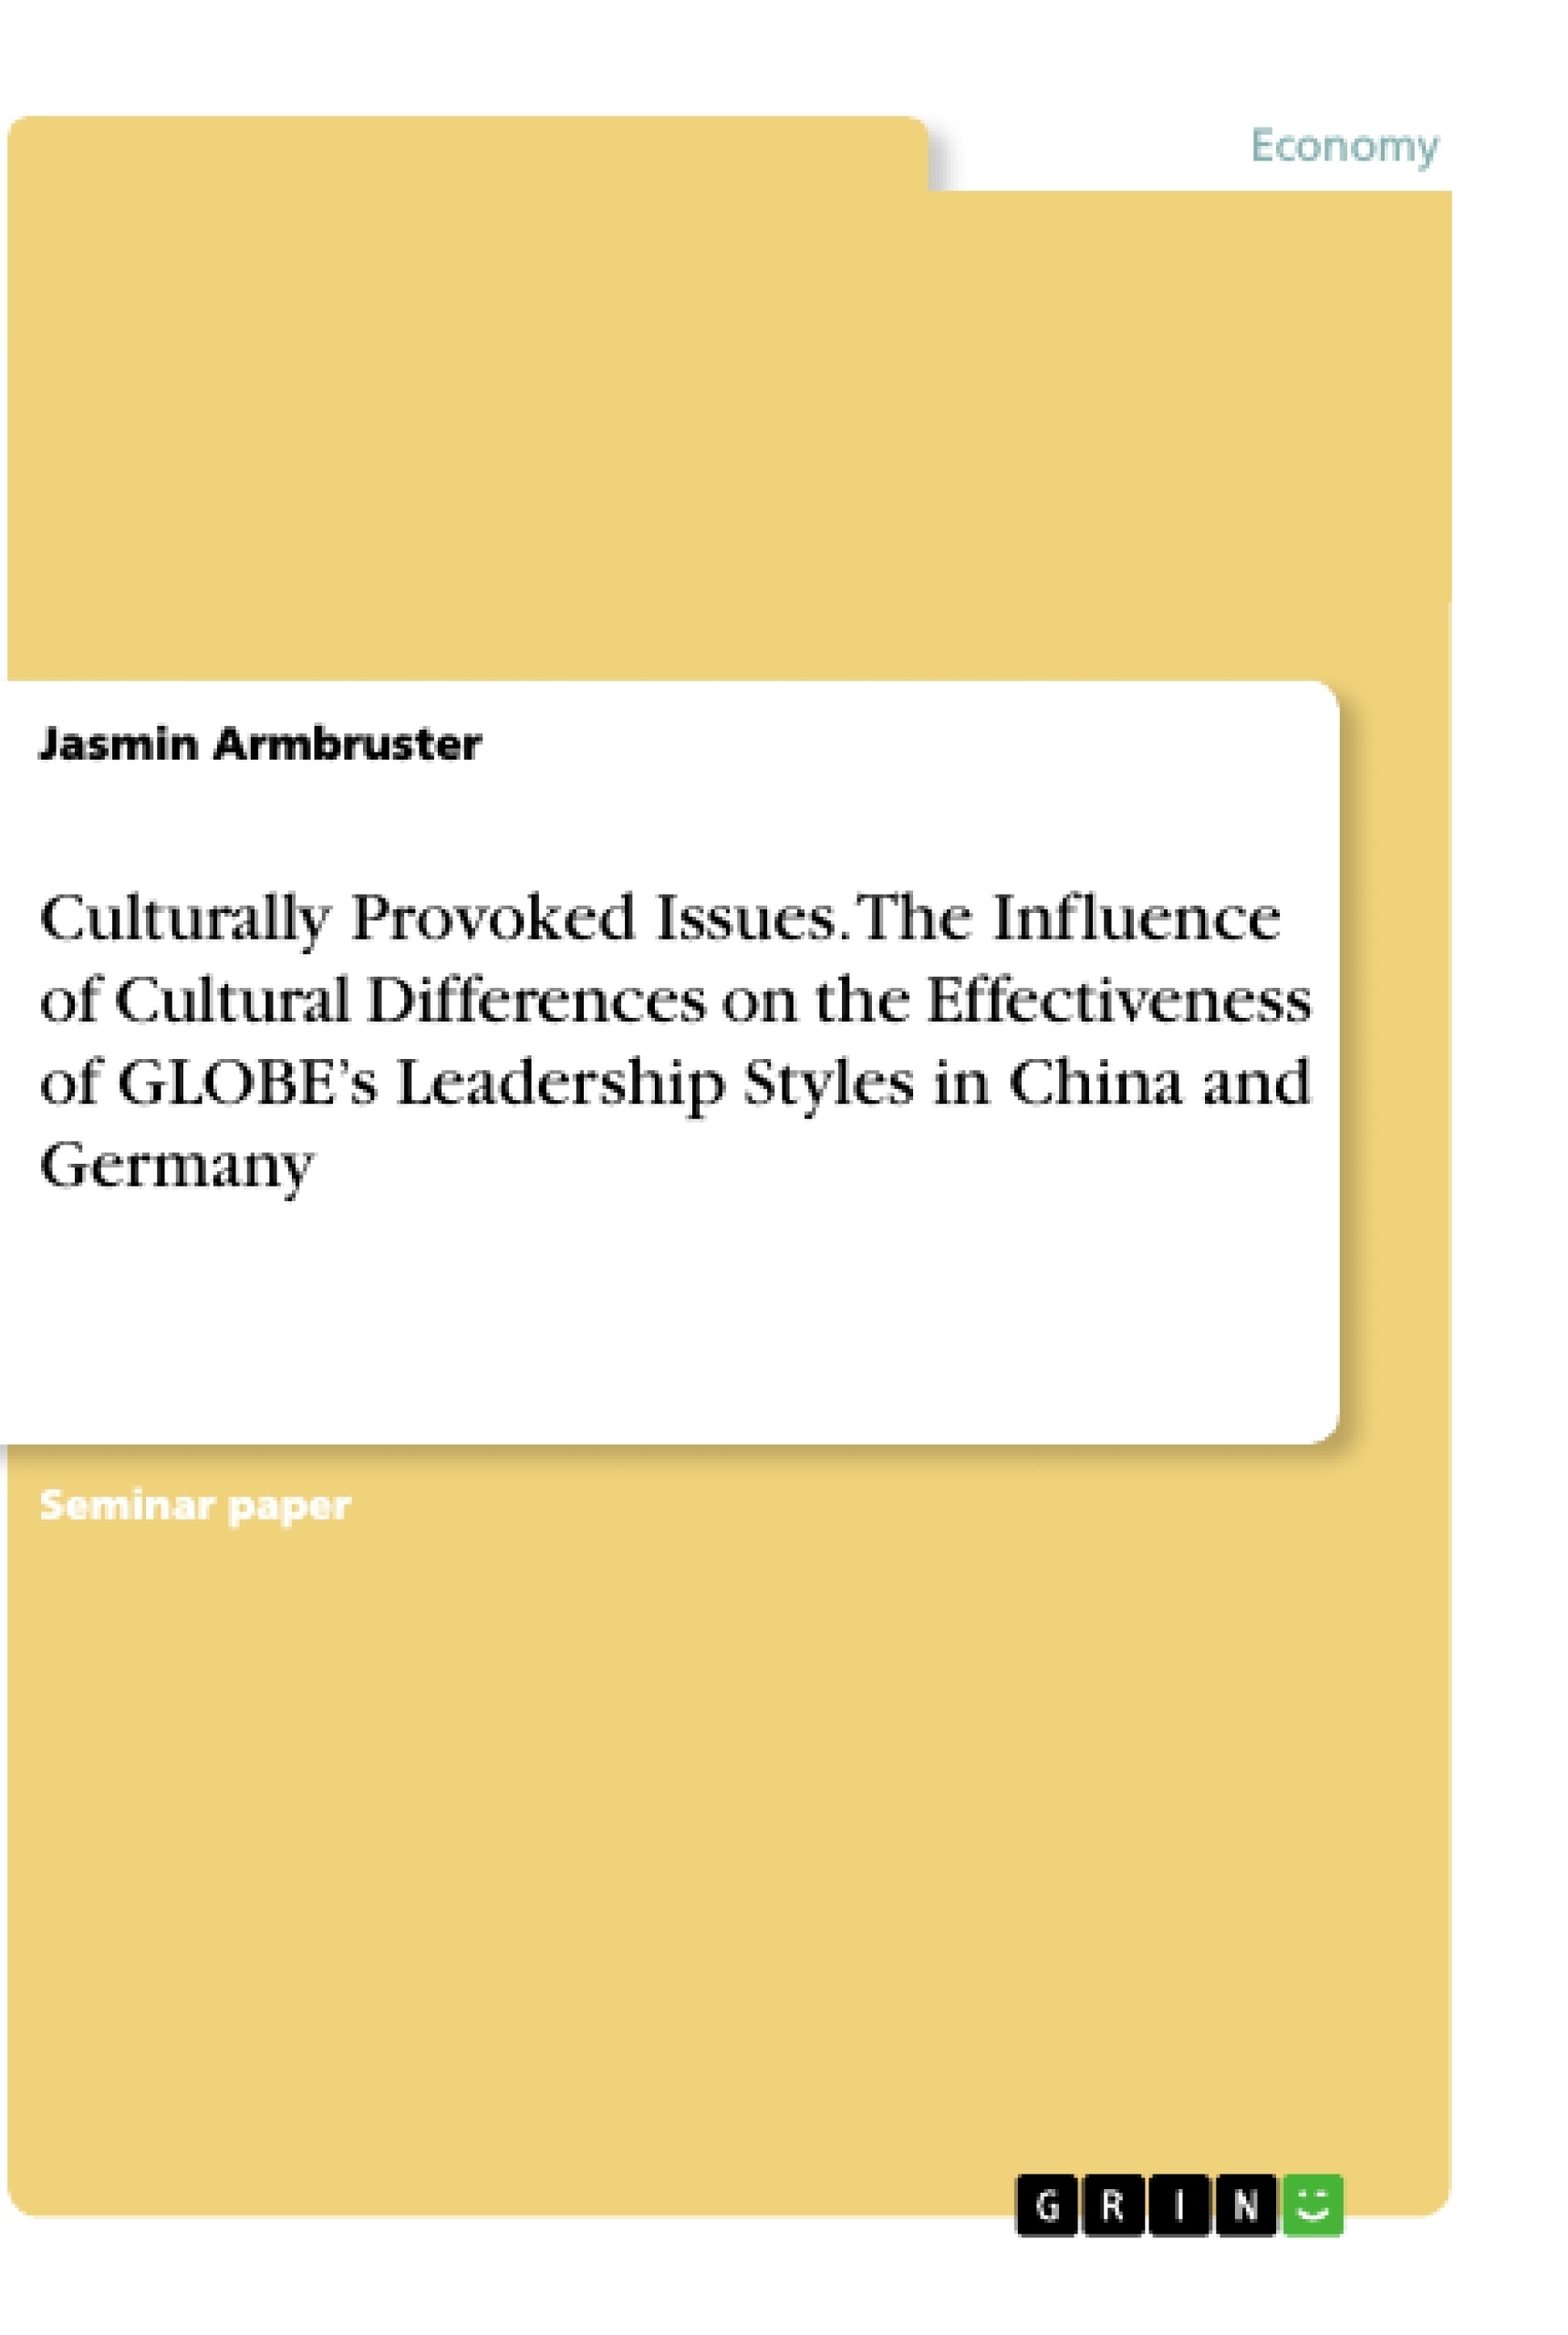 Title: Culturally Provoked Issues. The Influence of Cultural Differences on the Effectiveness of GLOBE’s Leadership Styles in China and Germany